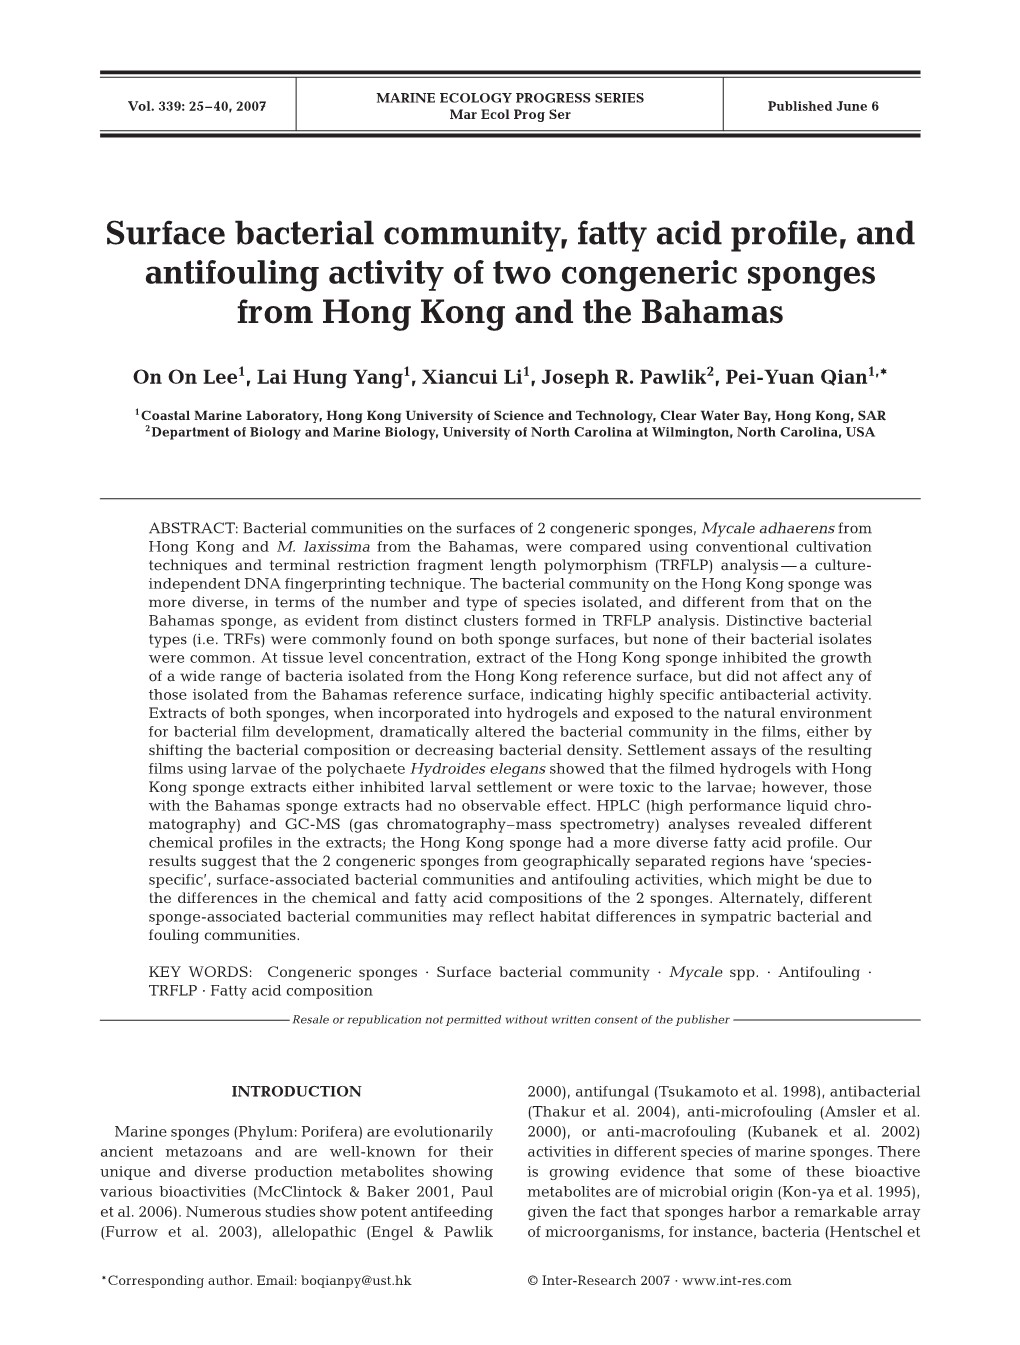 Surface Bacterial Community, Fatty Acid Profile, and Antifouling Activity of Two Congeneric Sponges from Hong Kong and the Bahamas